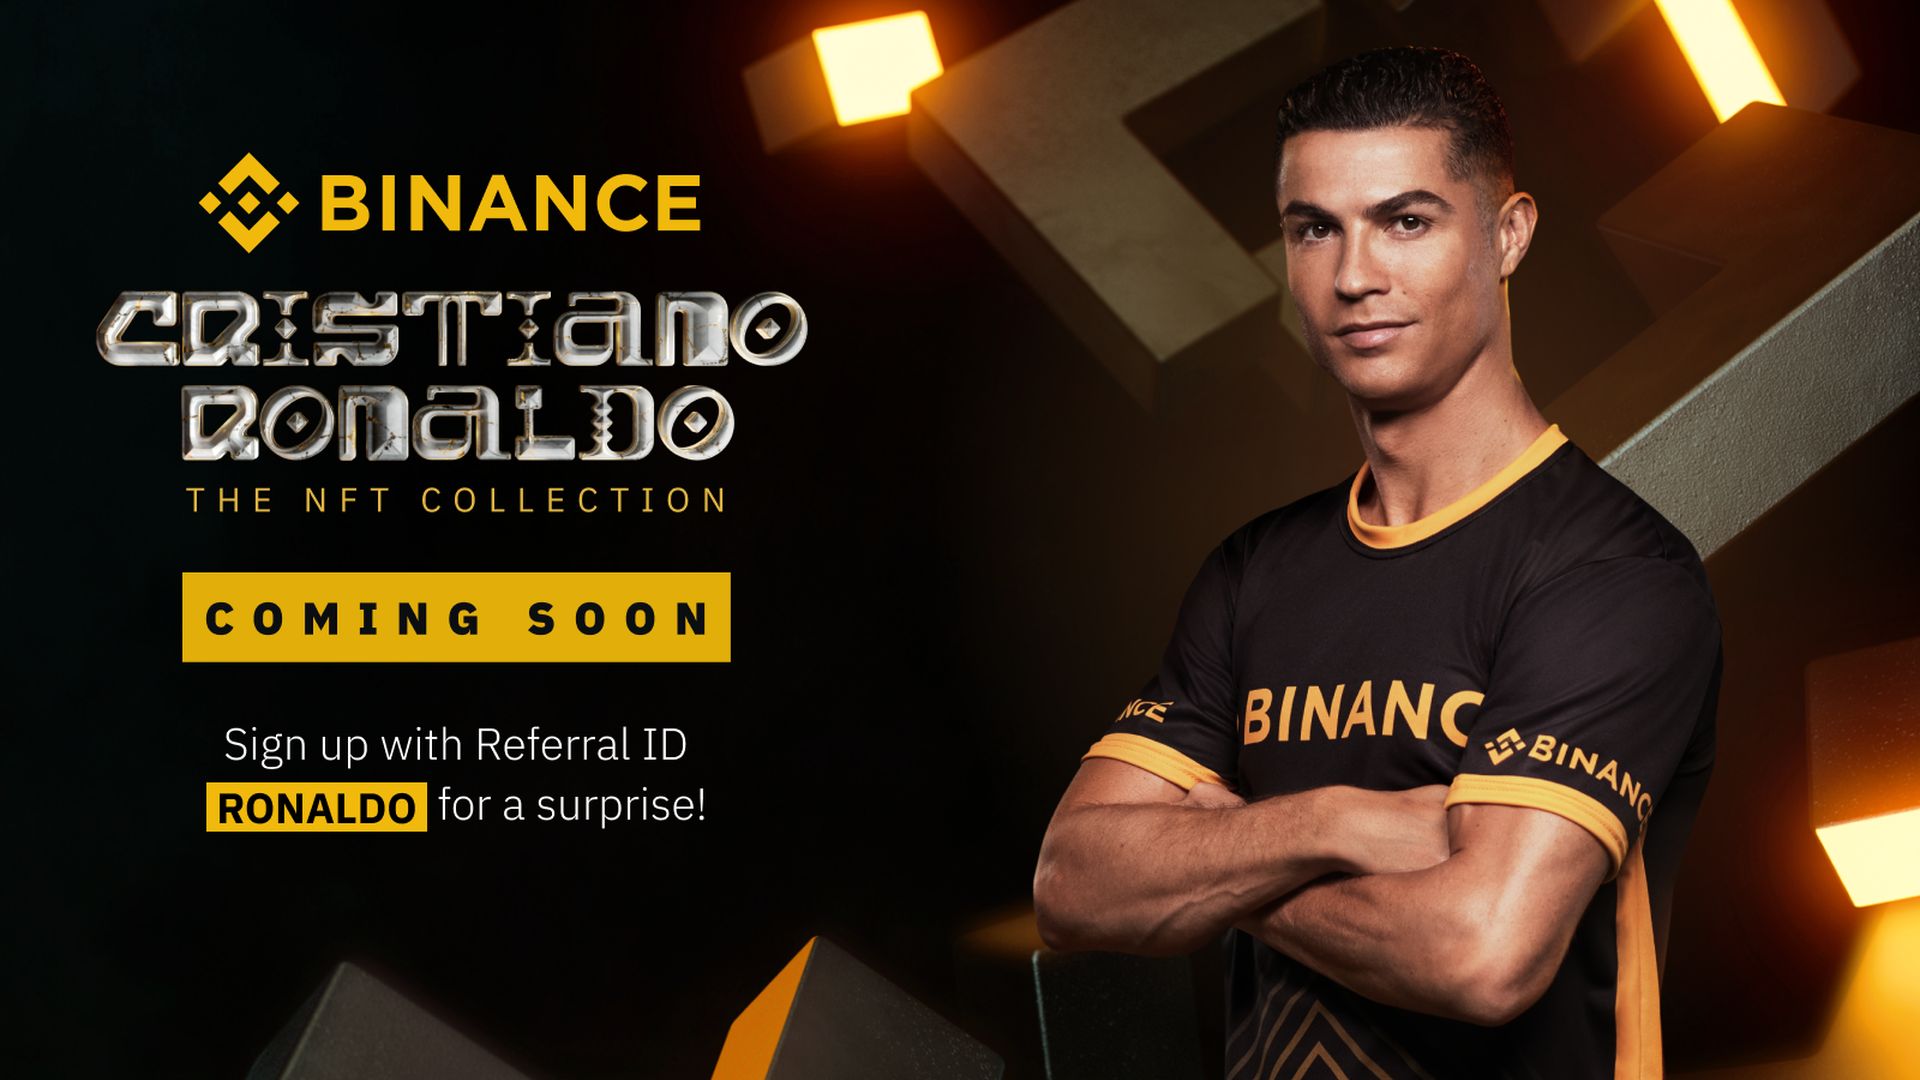 Ronaldo NFT collection will be launched on November 18